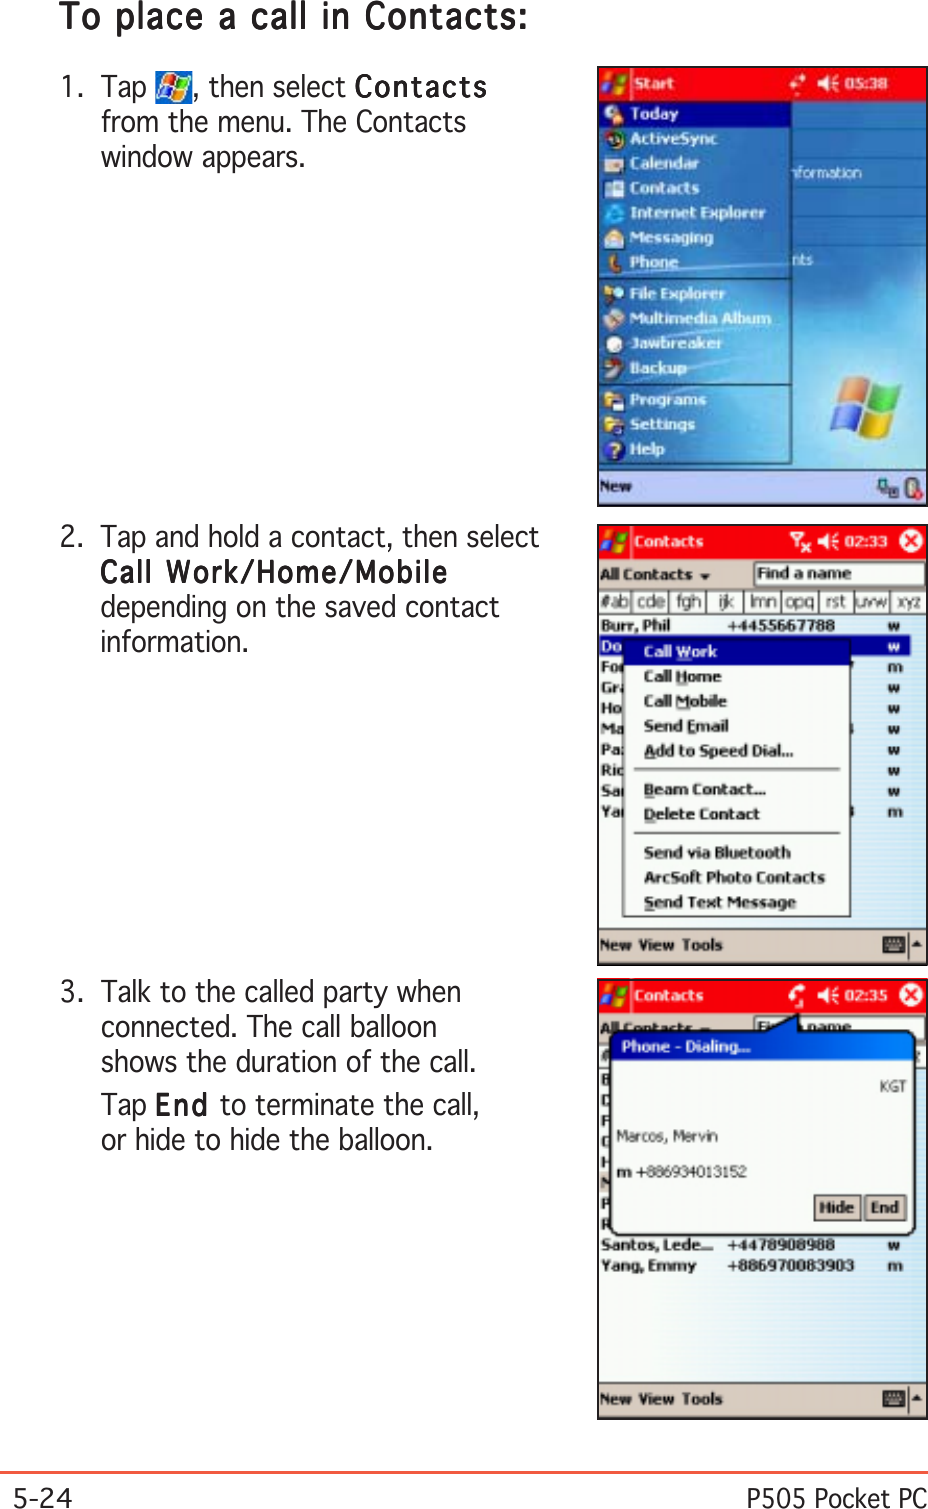 5-24P505 Pocket PCTo place a call in Contacts:To place a call in Contacts:To place a call in Contacts:To place a call in Contacts:To place a call in Contacts:1. Tap  , then select ContactsContactsContactsContactsContactsfrom the menu. The Contactswindow appears.2. Tap and hold a contact, then selectCall Work/Home/MobileCall Work/Home/MobileCall Work/Home/MobileCall Work/Home/MobileCall Work/Home/Mobiledepending on the saved contactinformation.3. Talk to the called party whenconnected. The call balloonshows the duration of the call.Tap EndEndEndEndEn d to terminate the call,or hide to hide the balloon.